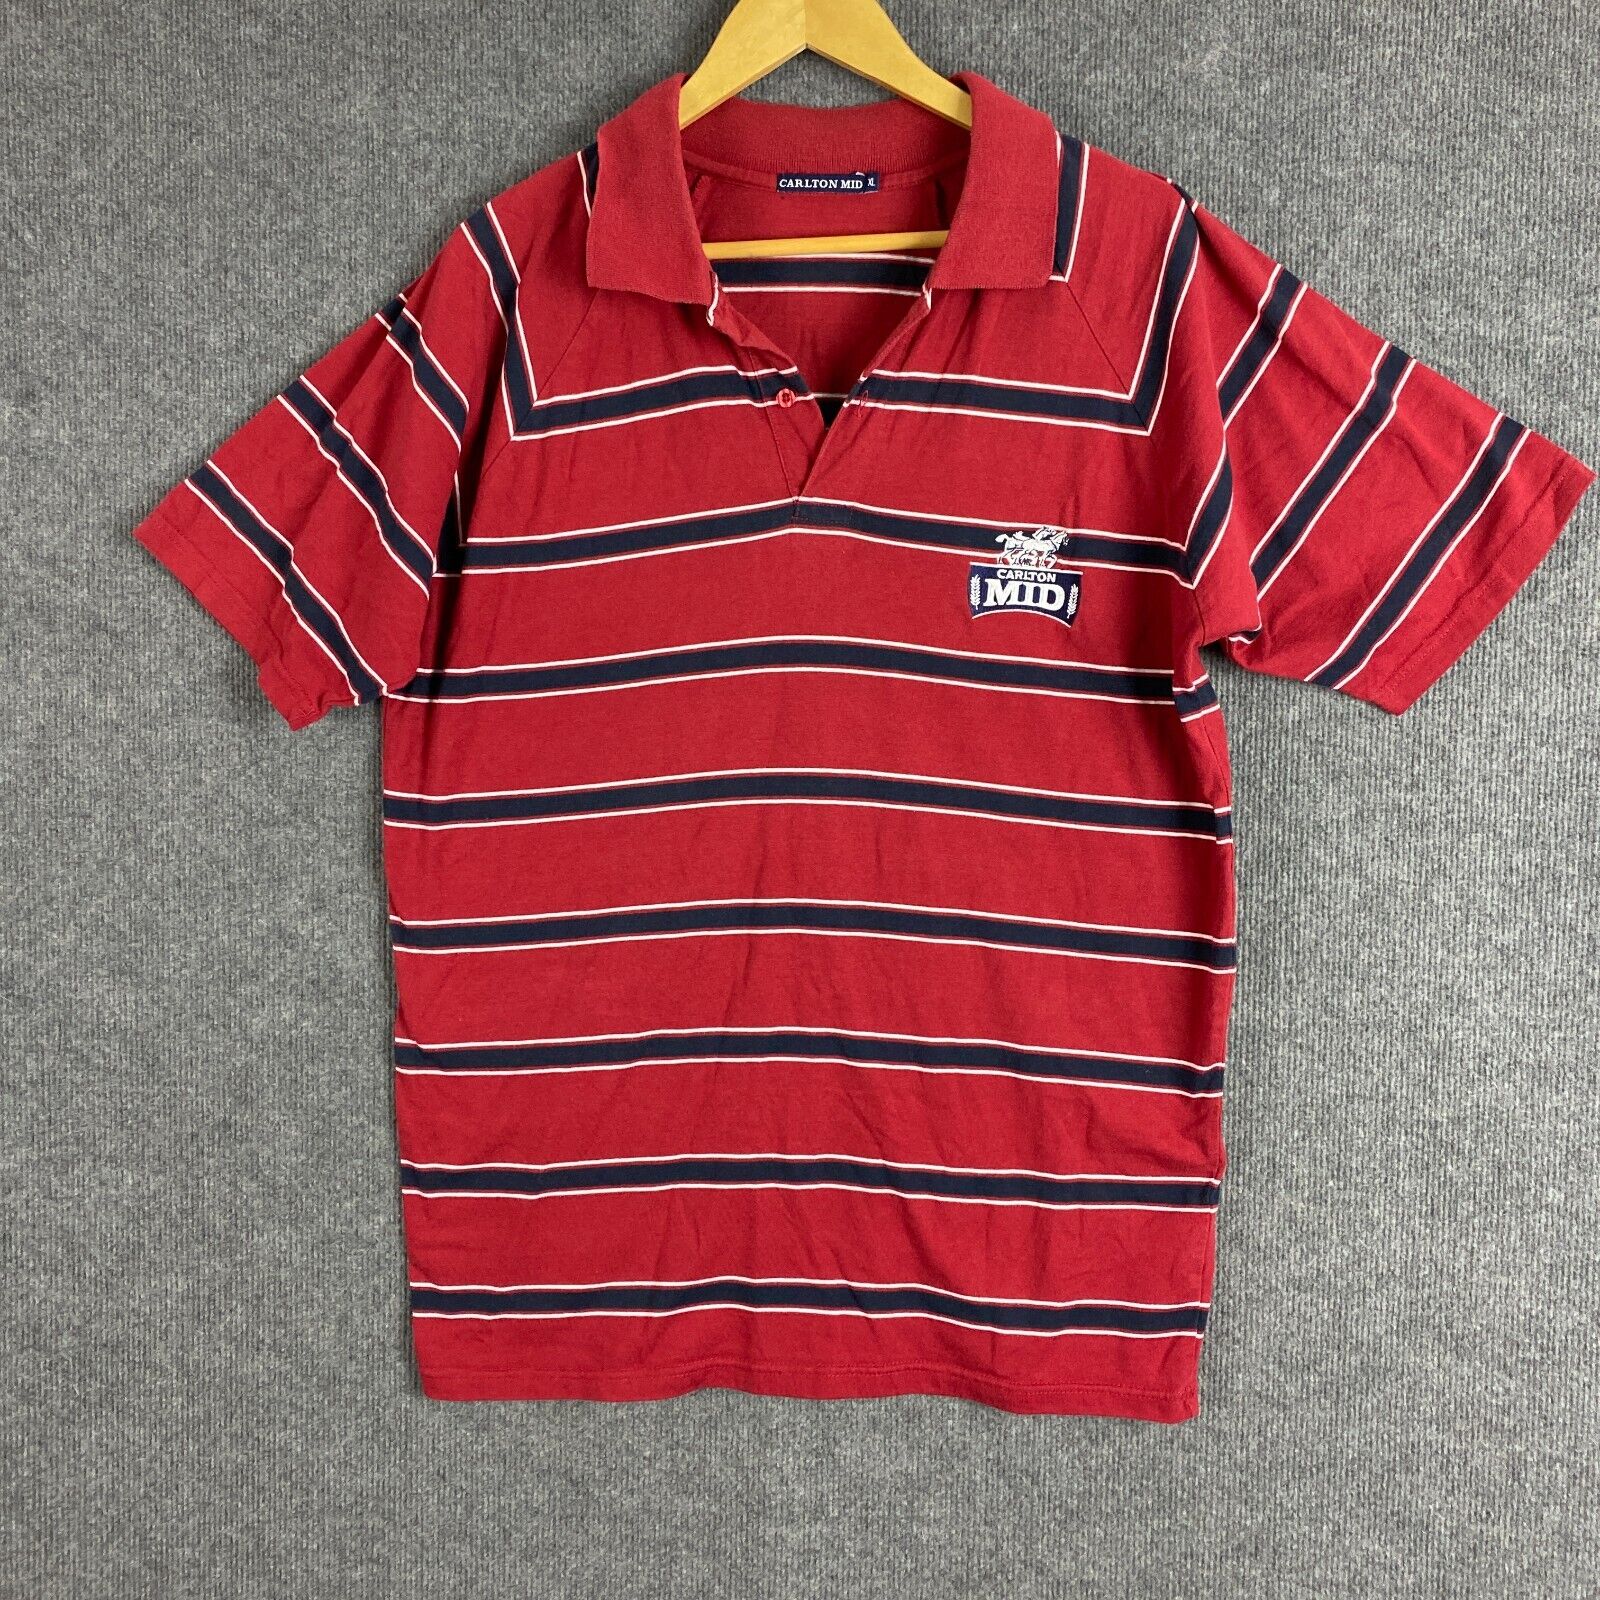 Carlton Mid Polo Shirt Mens Extra Large Red Blue Striped Beer Brewery Rugby